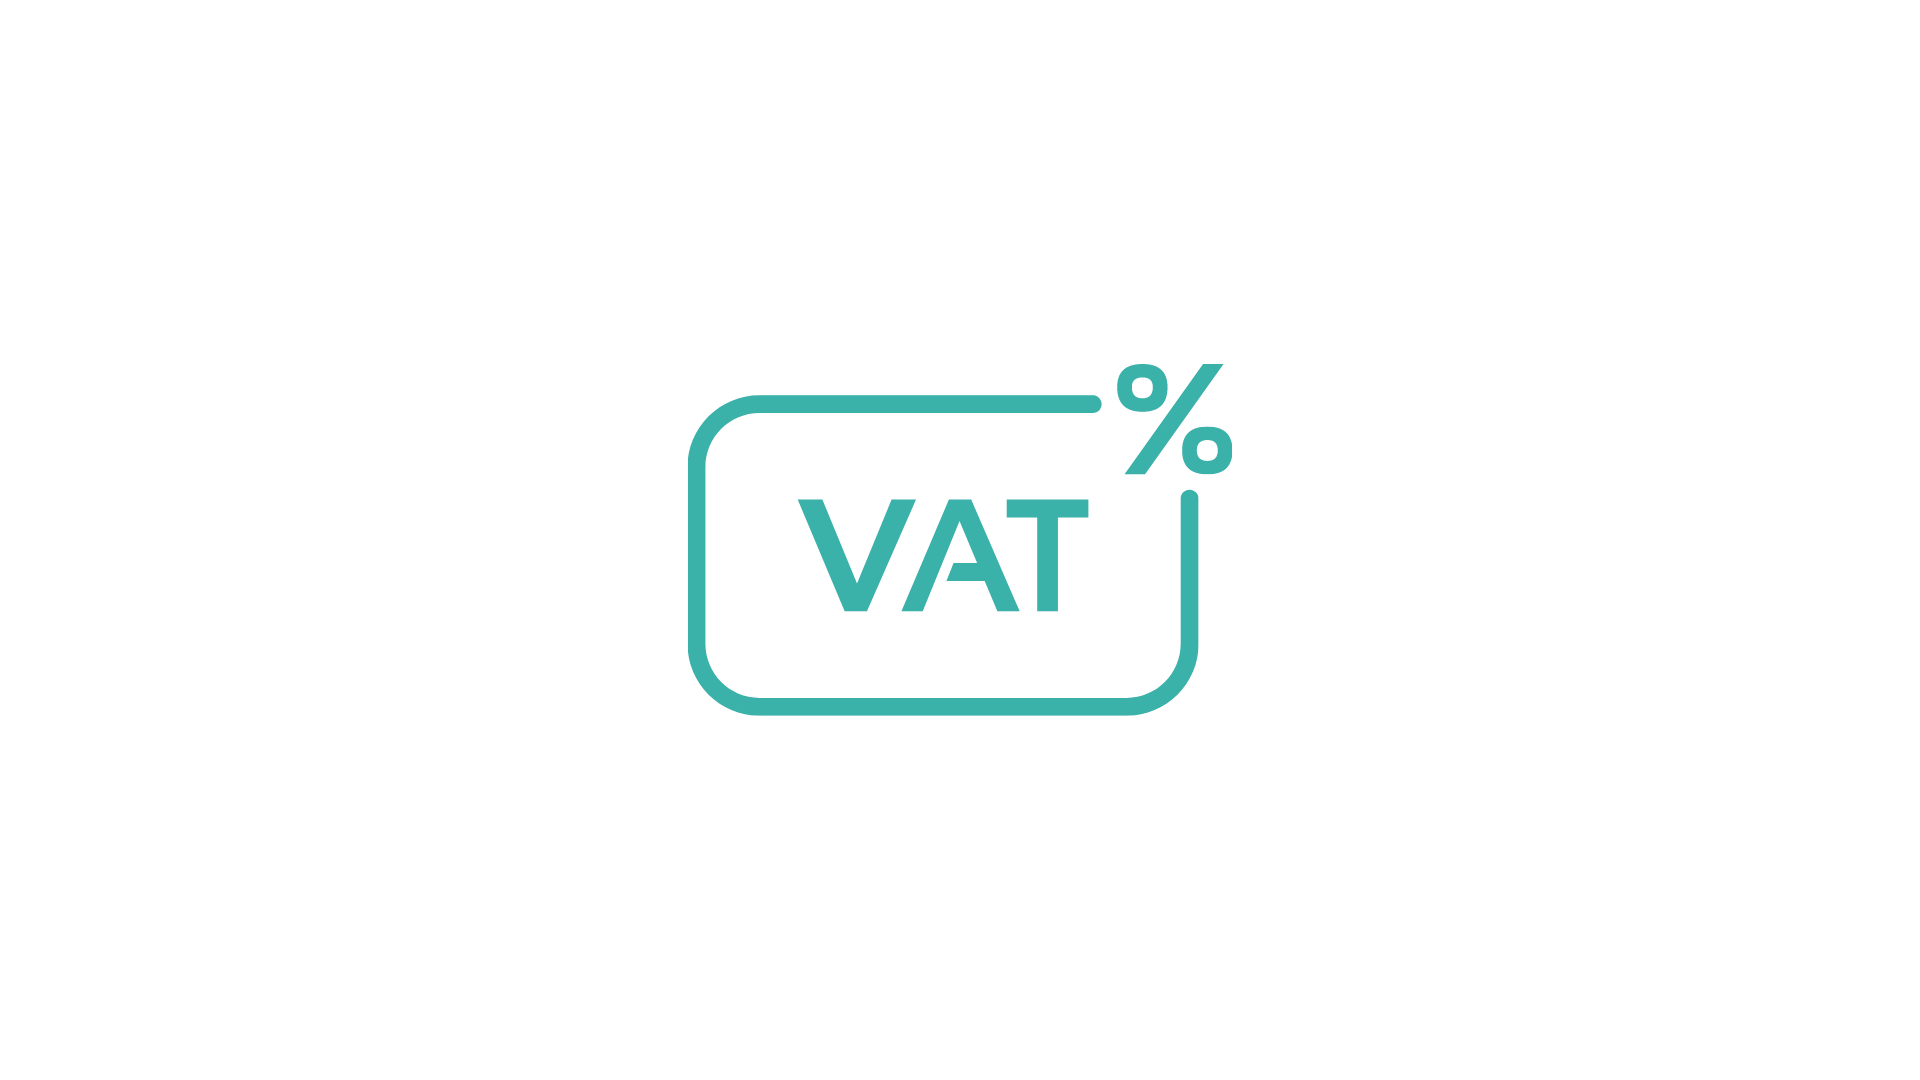 VAT OSS procedure - what is it, who does it apply to and how to book it?